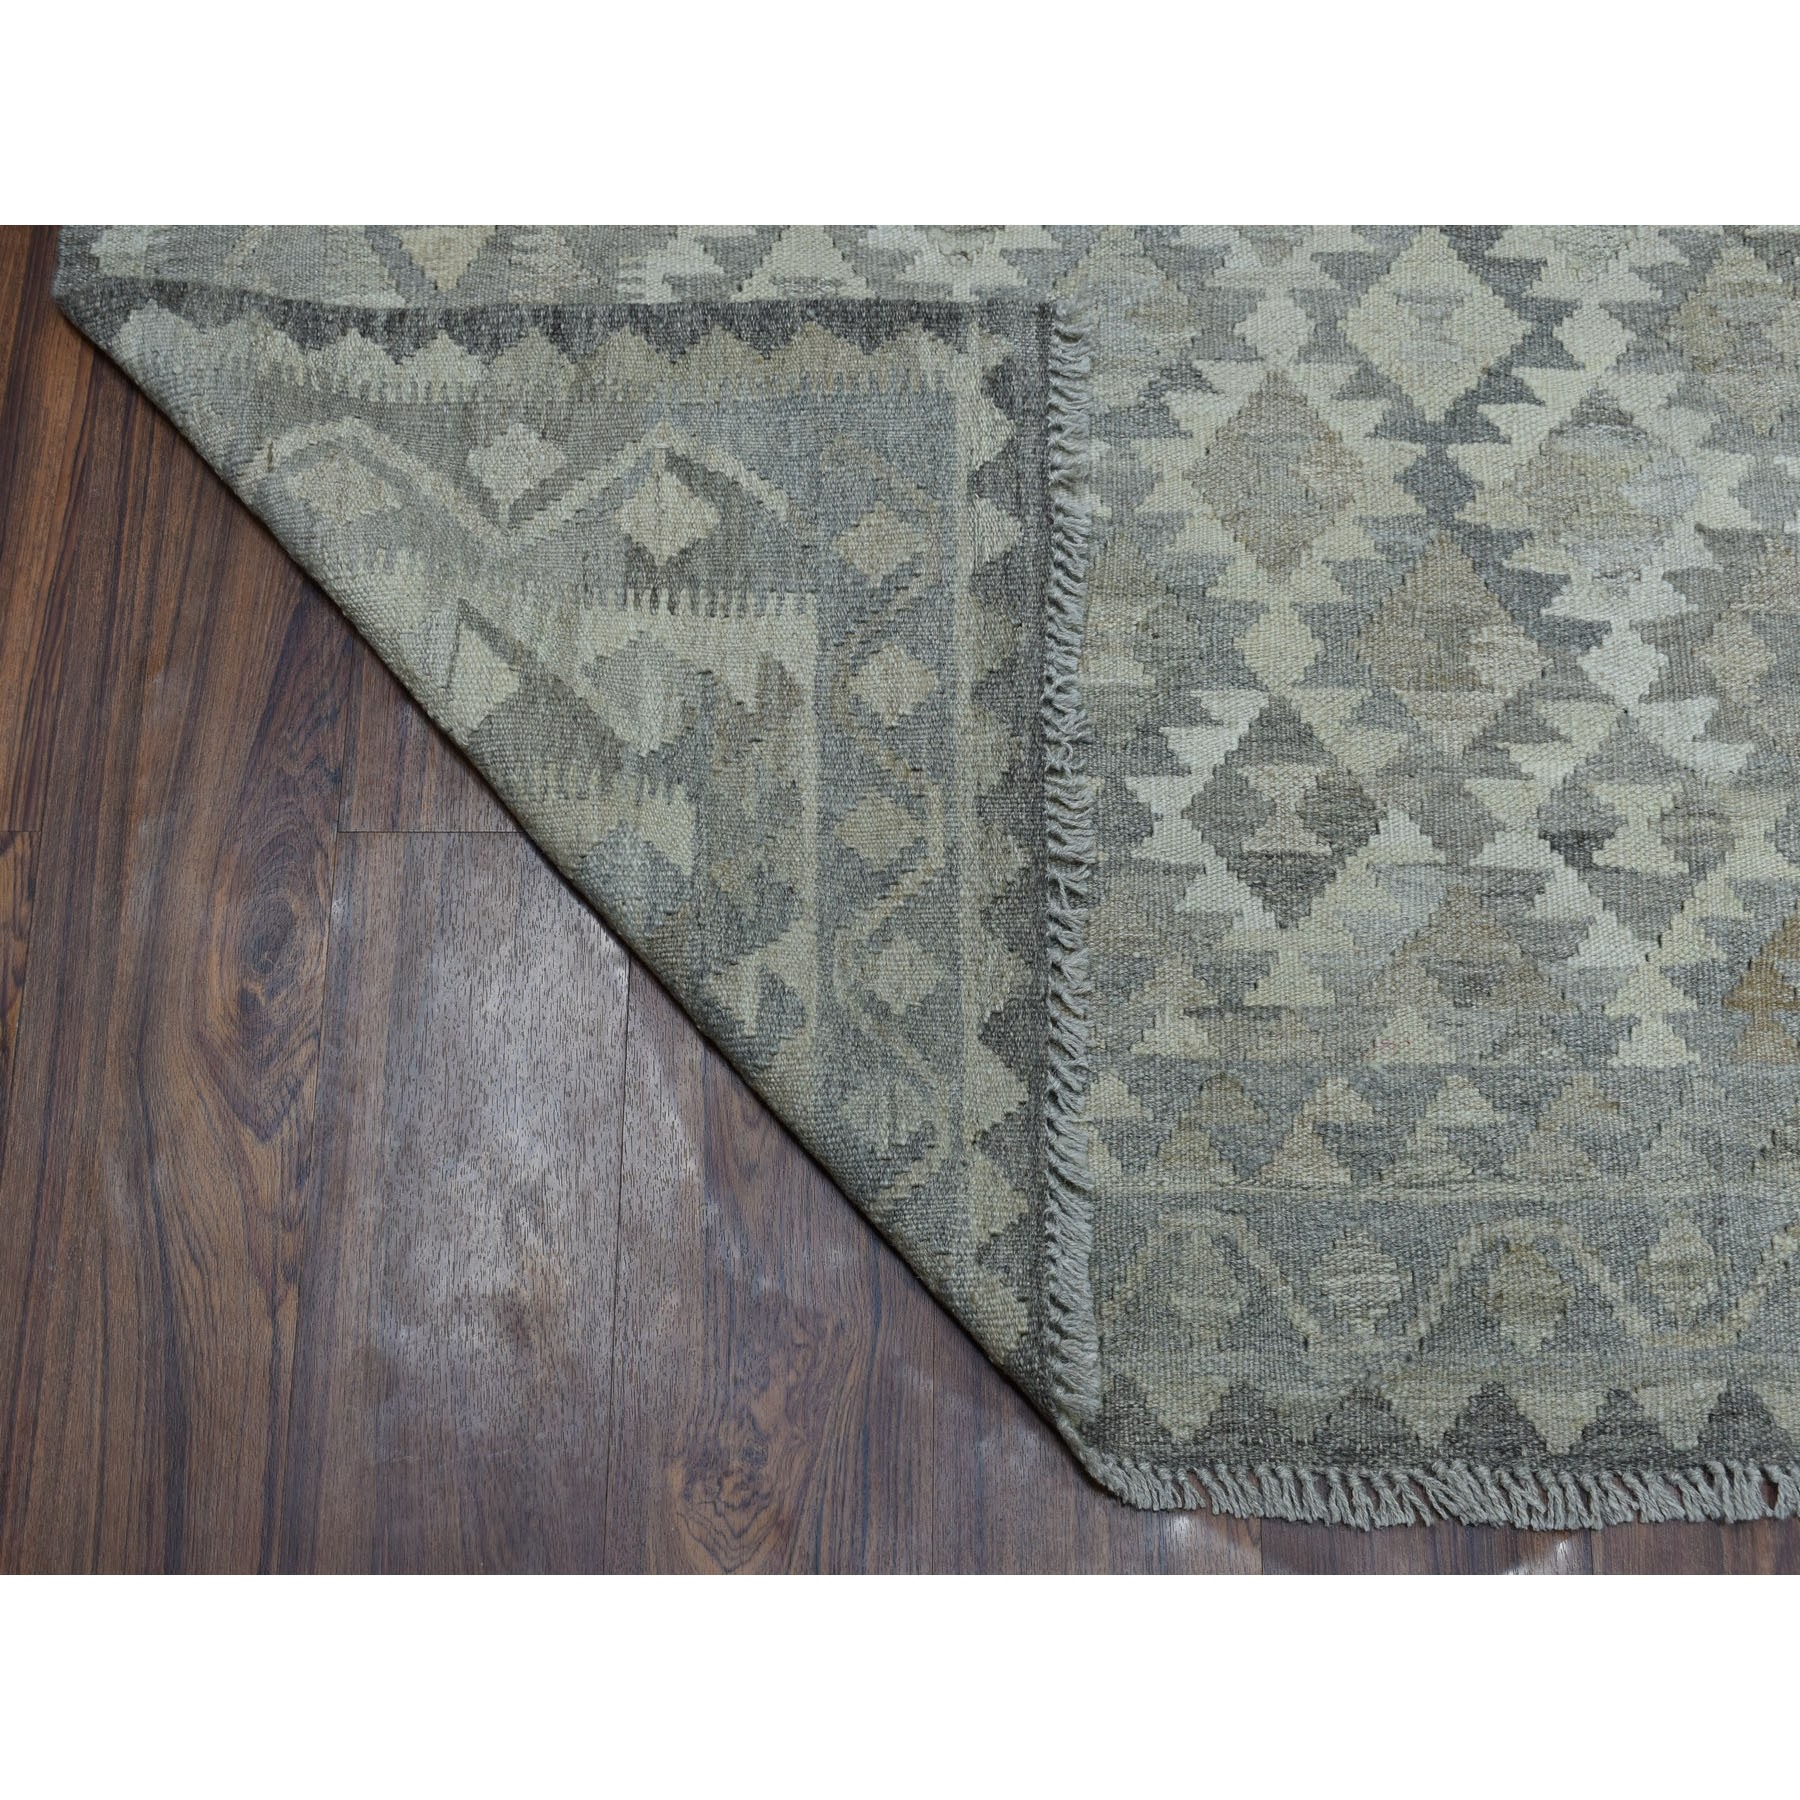 5-9 x8-1  Undyed Natural Wool Afghan Kilim Reversible Hand Woven Oriental Rug 